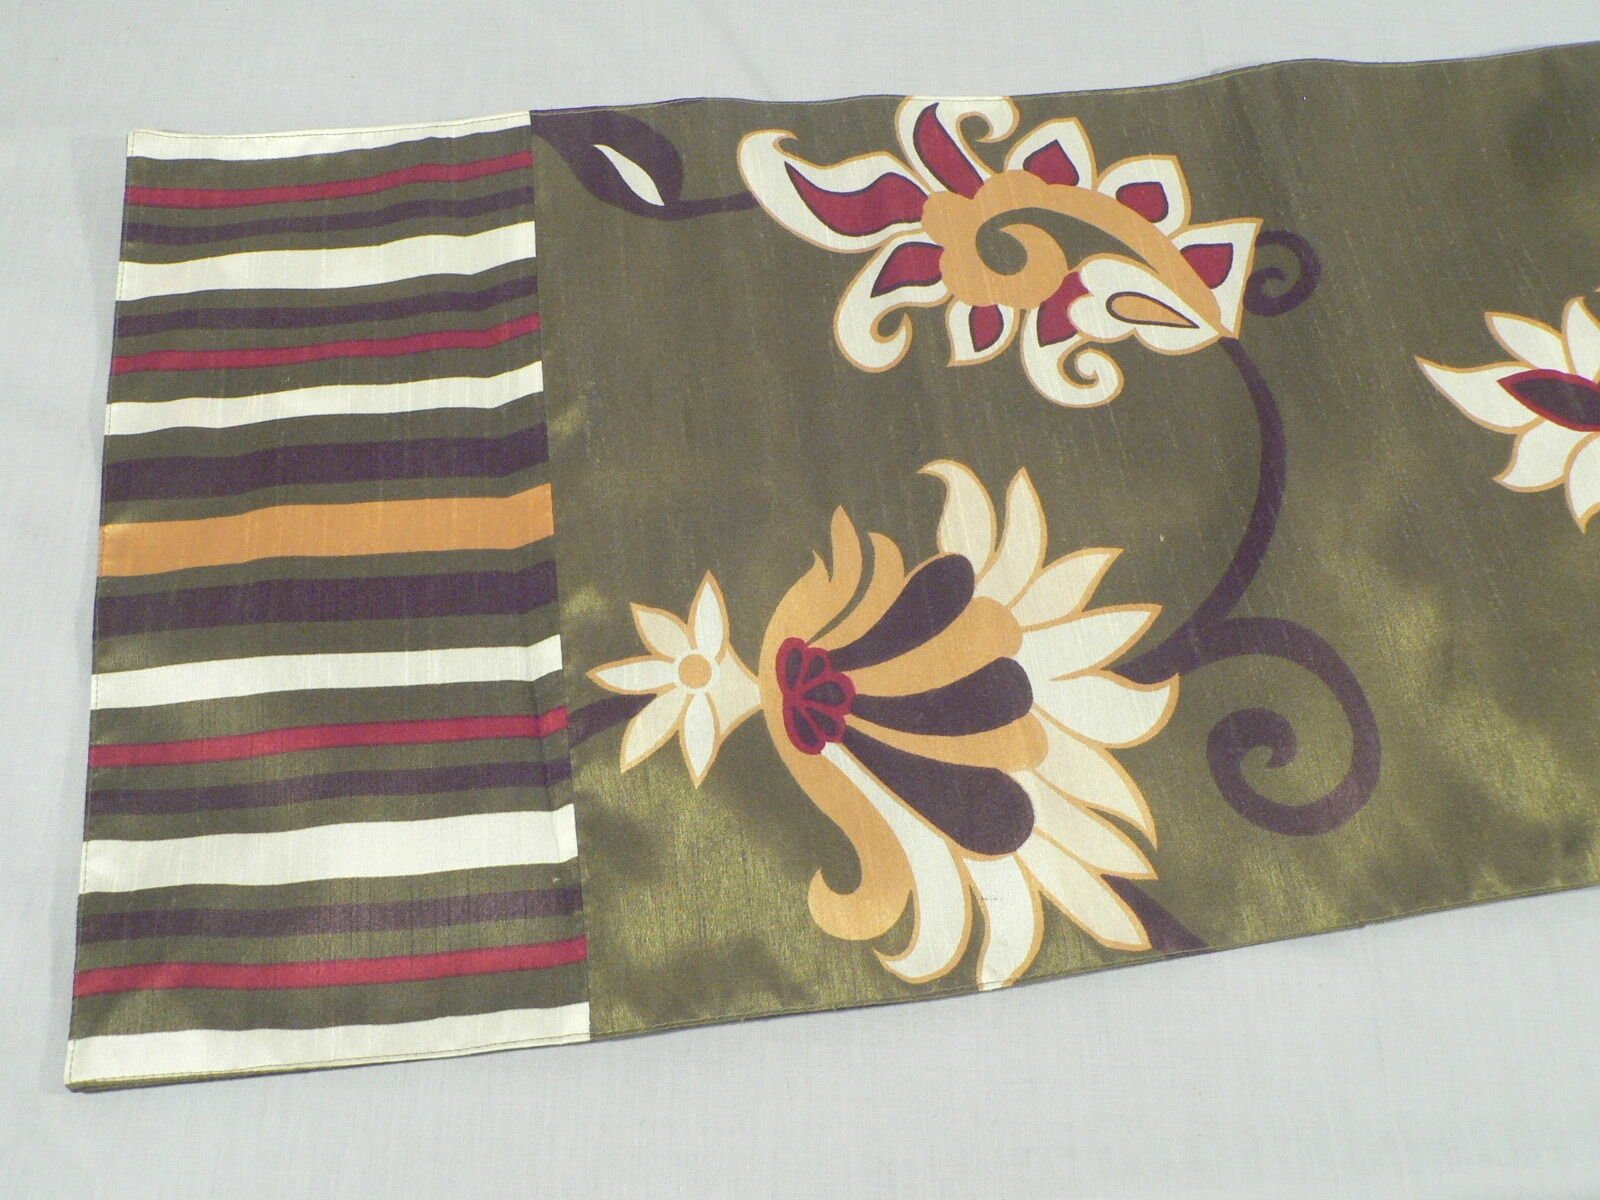 Table runner floral pattern, Striped ends 14" x 70" Hemmed and Lined